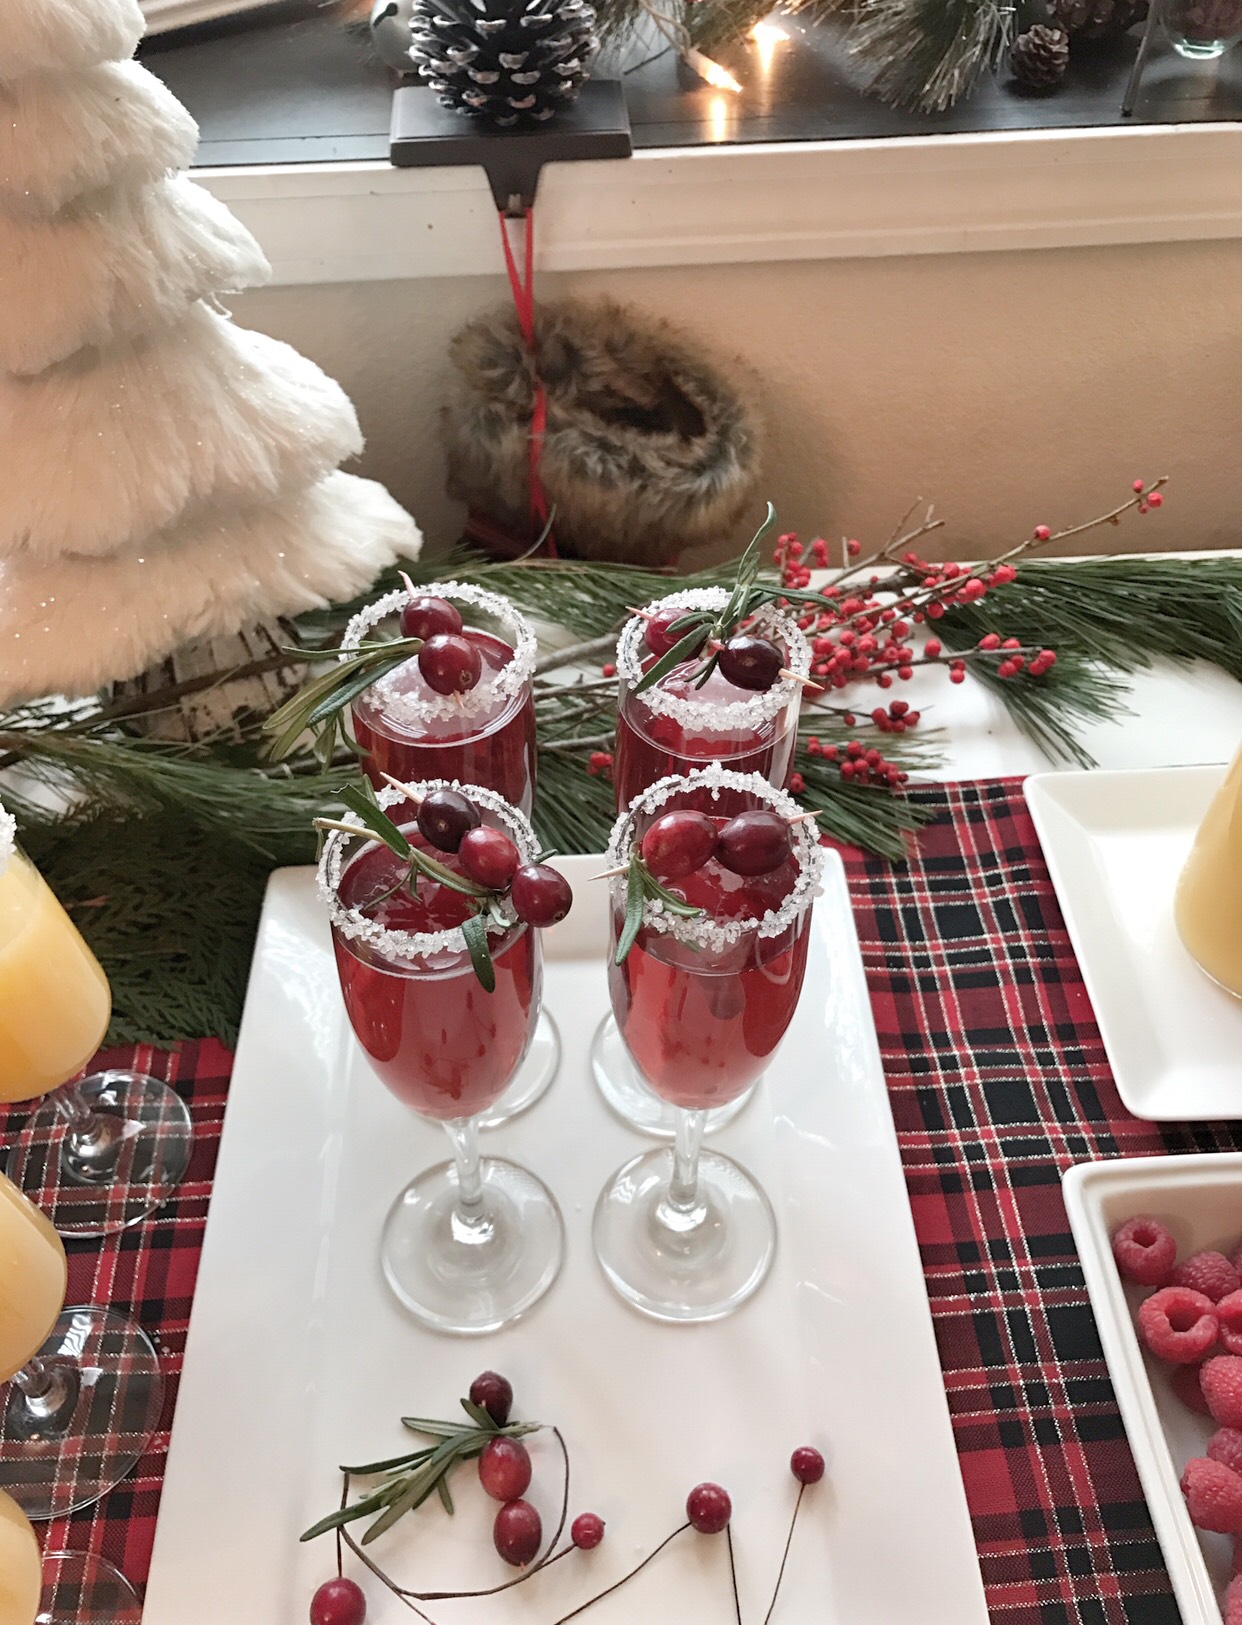 Cranberry Mimosas for Christmas brunch.